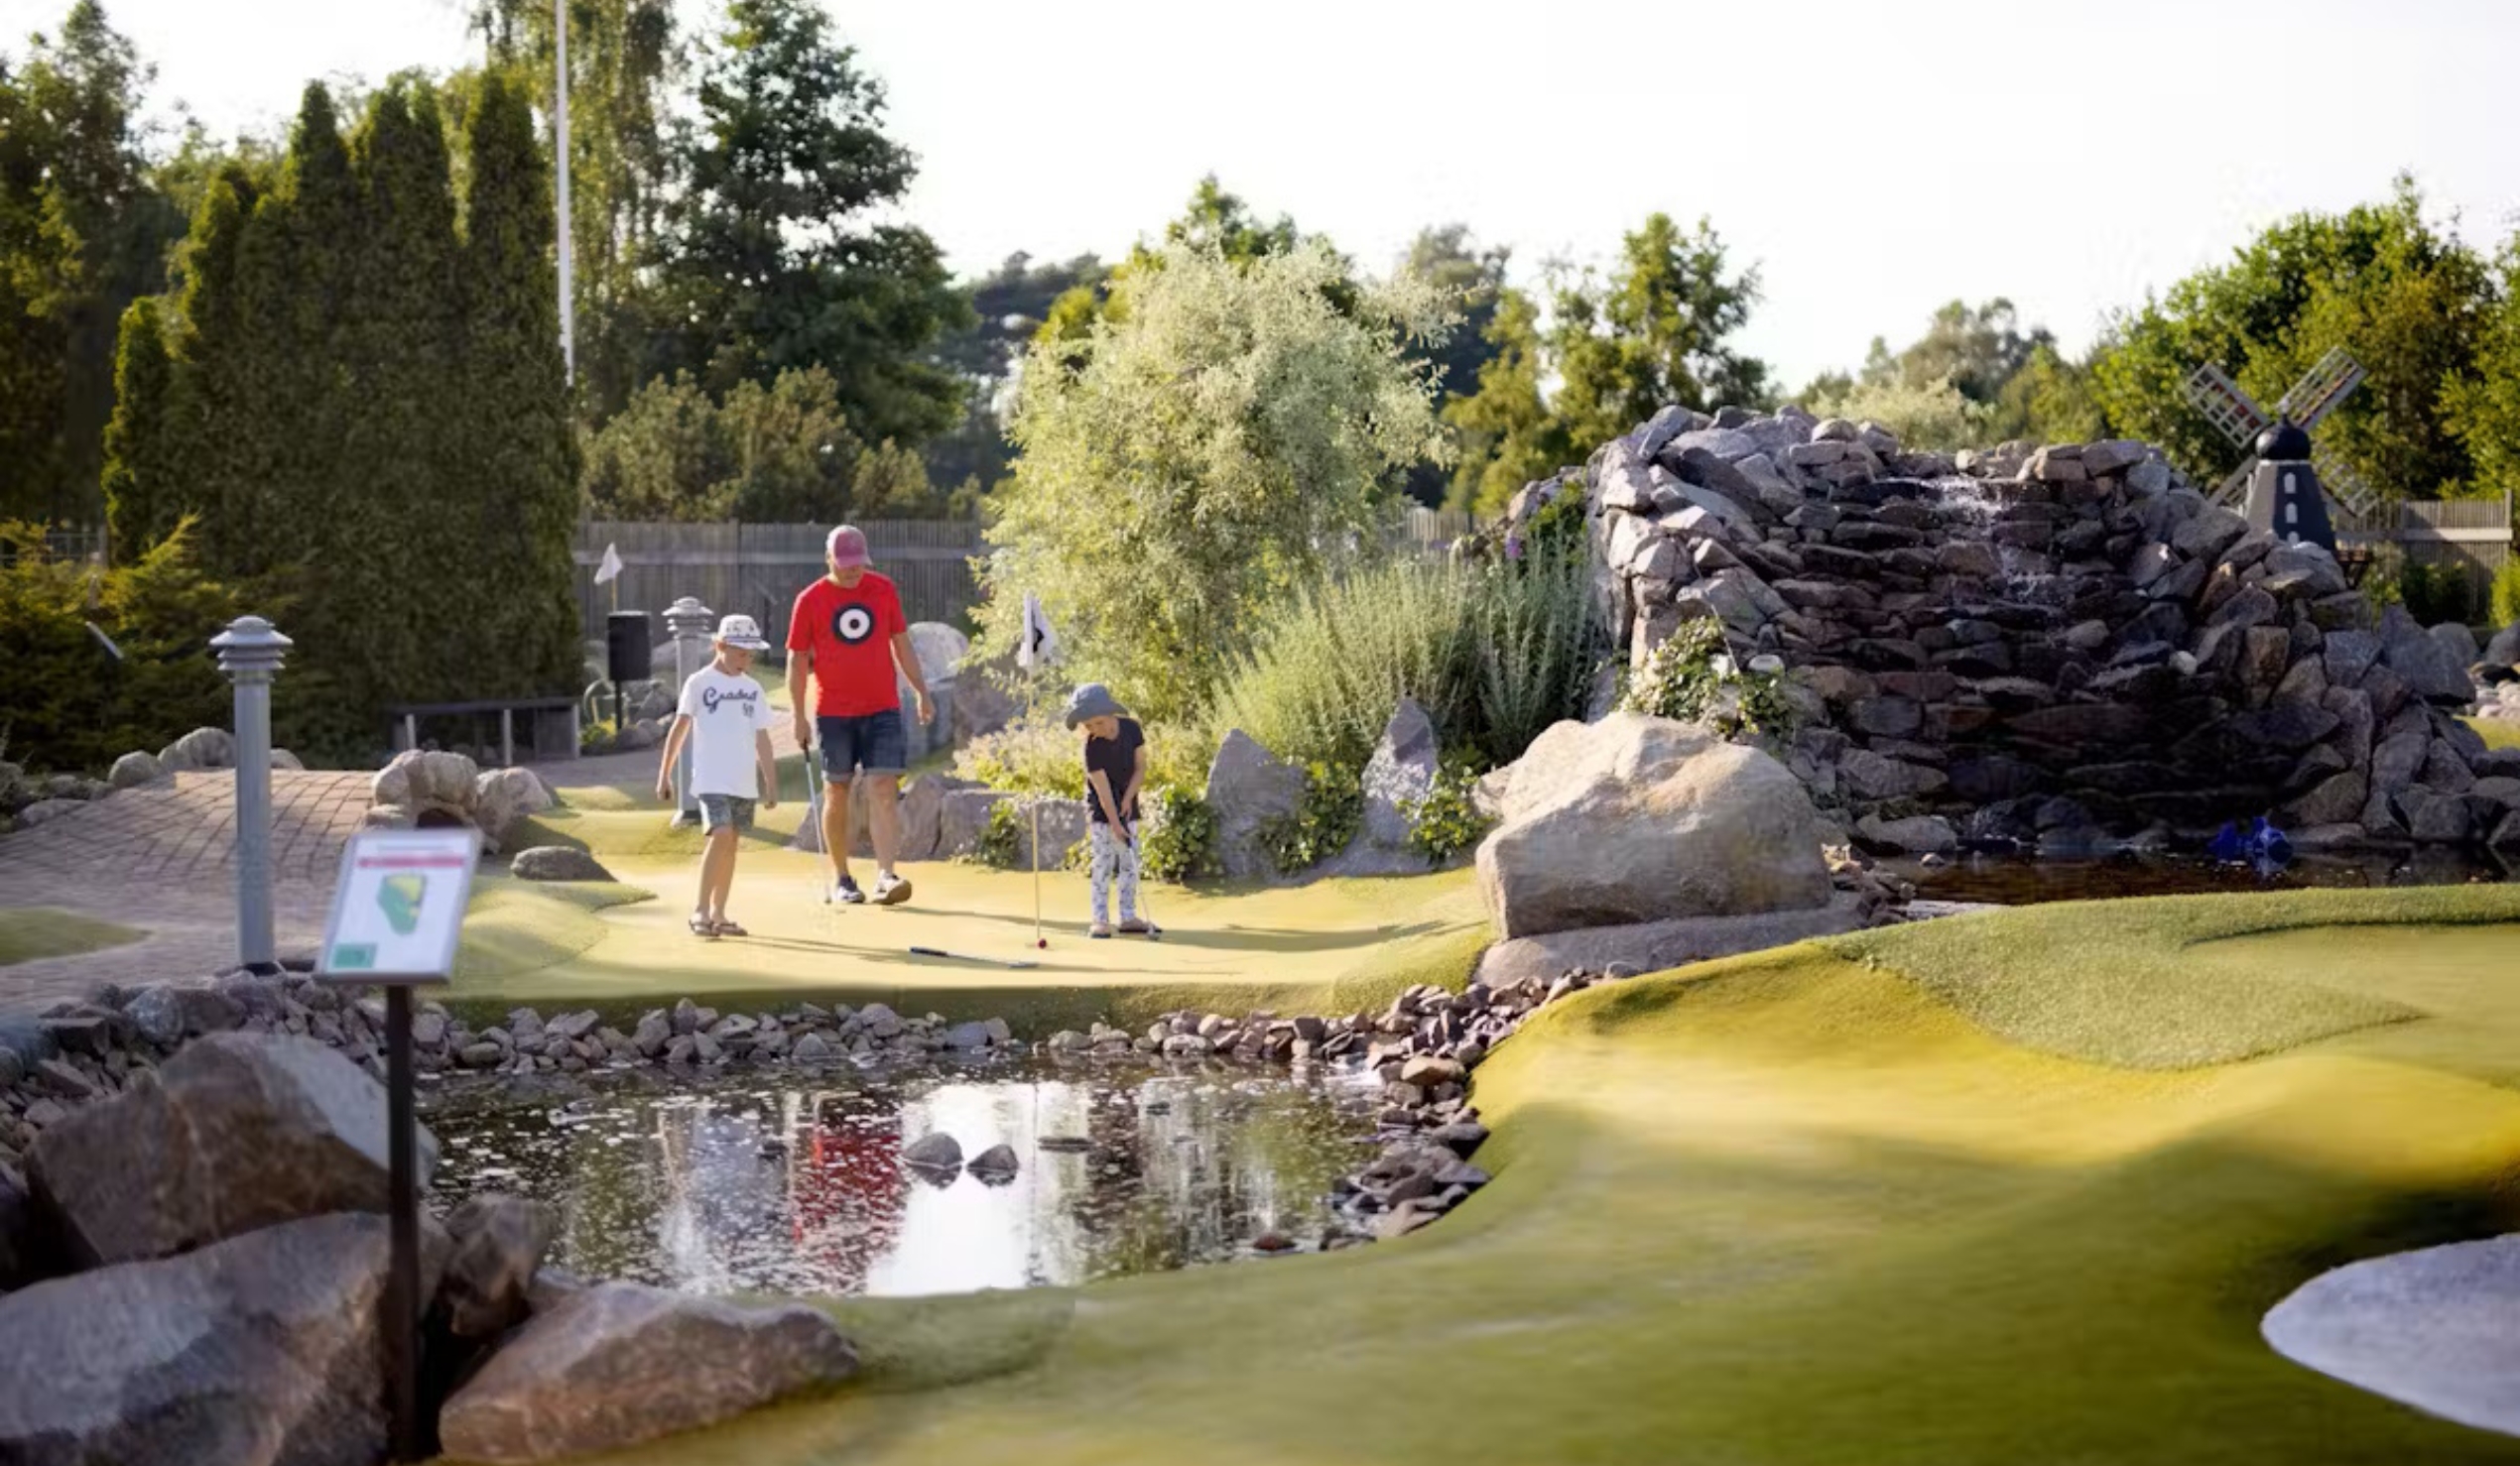 At Haverdals Camping, there is a nice adventure golf course